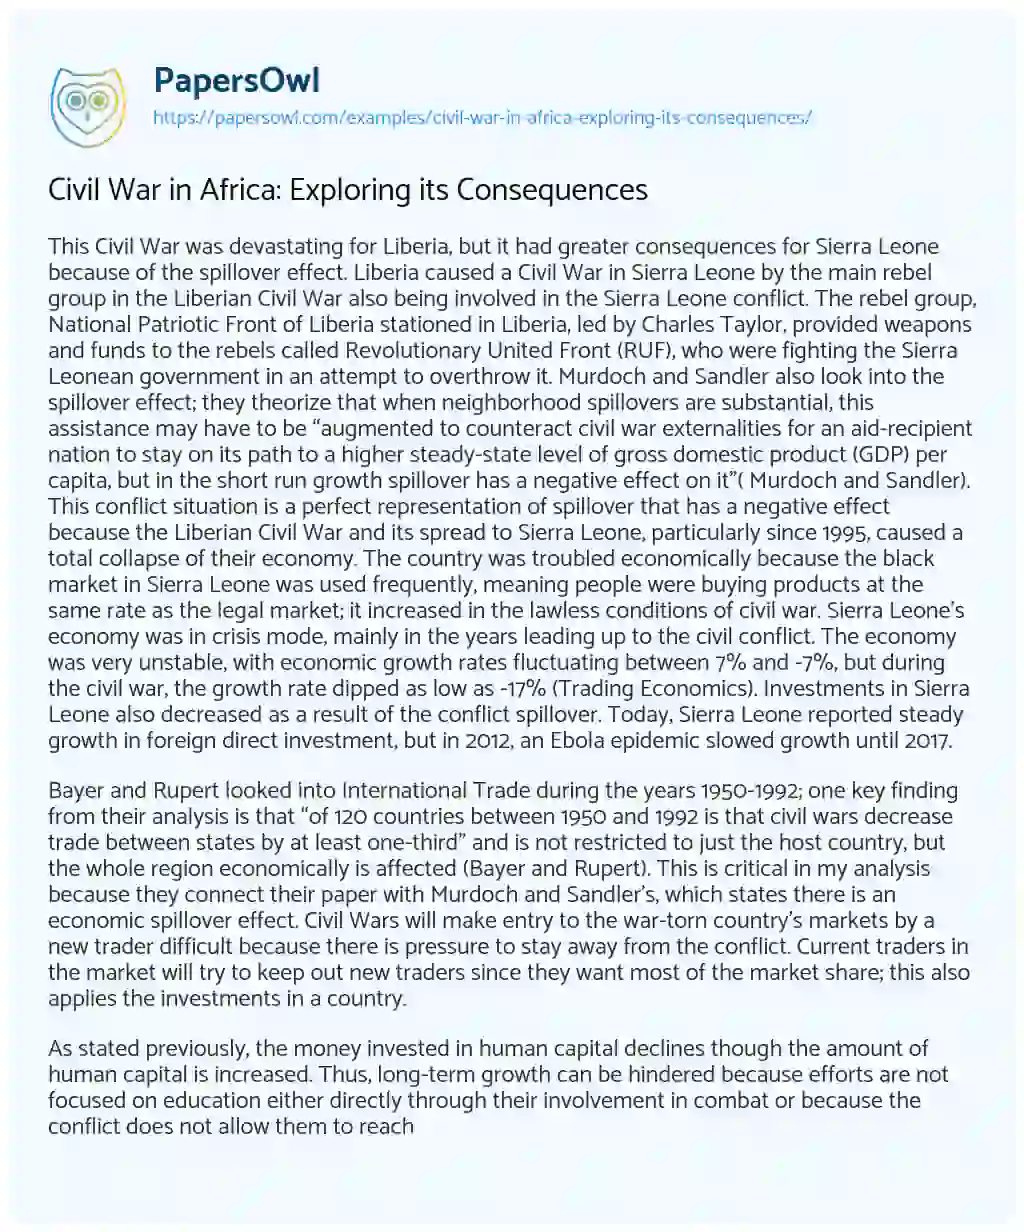 Essay on Civil War in Africa: Exploring its Consequences